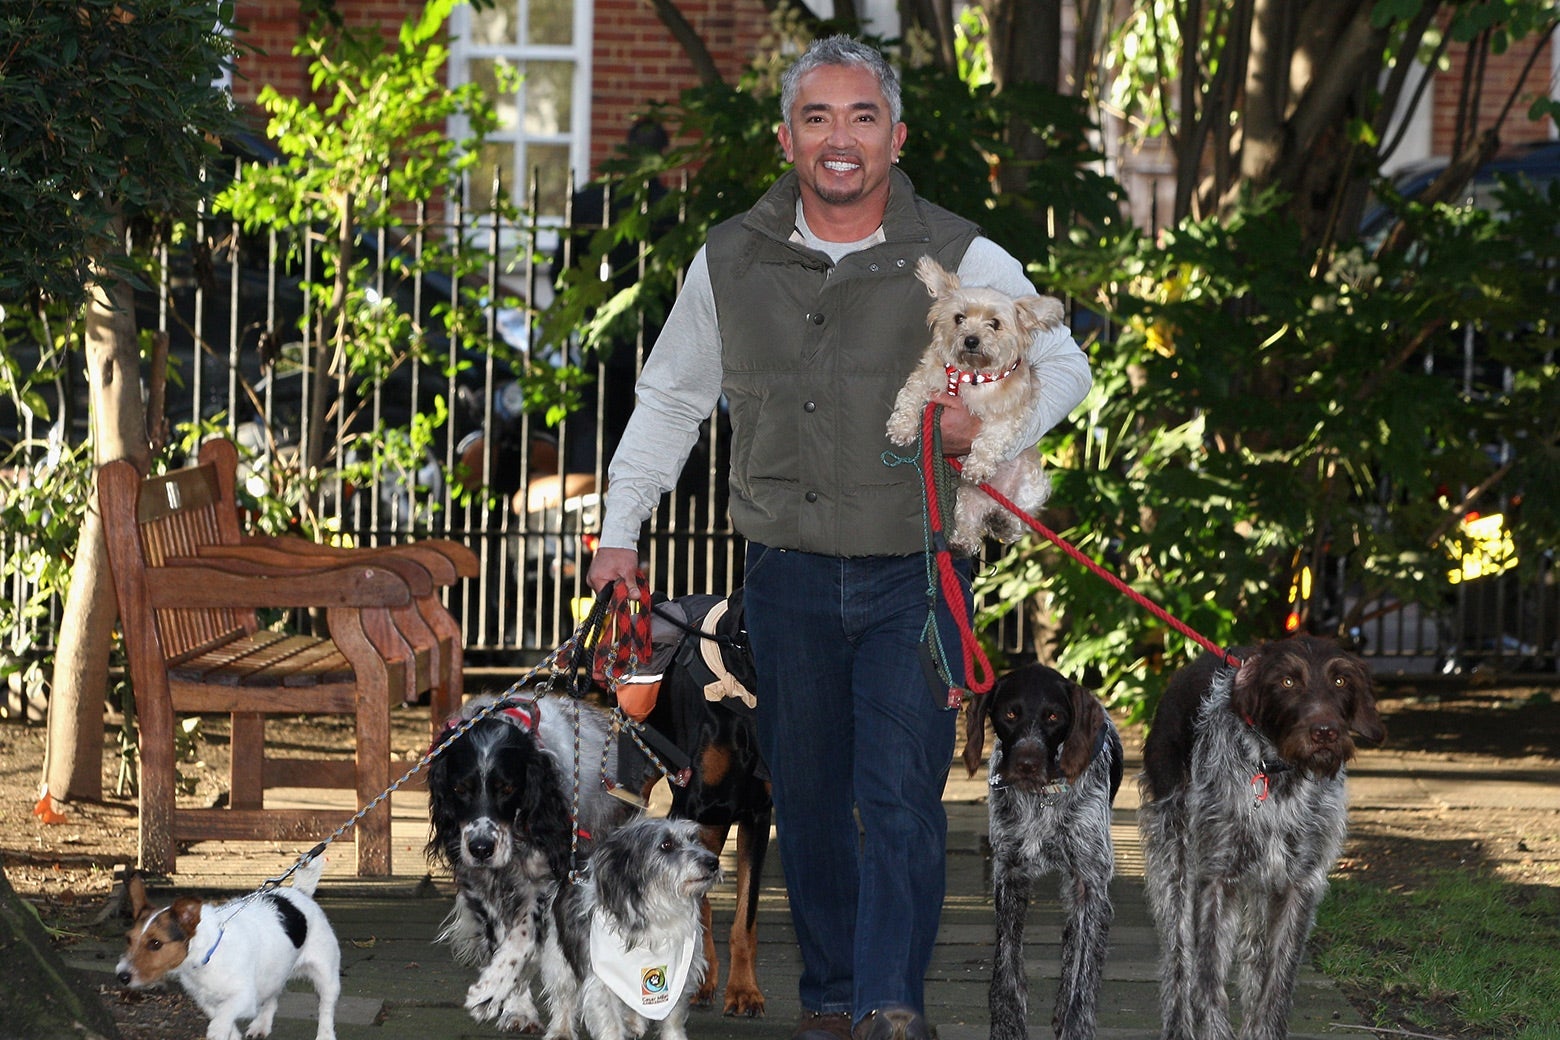 Cesar Millan, with several dogs in tow, stands in front of a bench and a gate fencing off a garden.